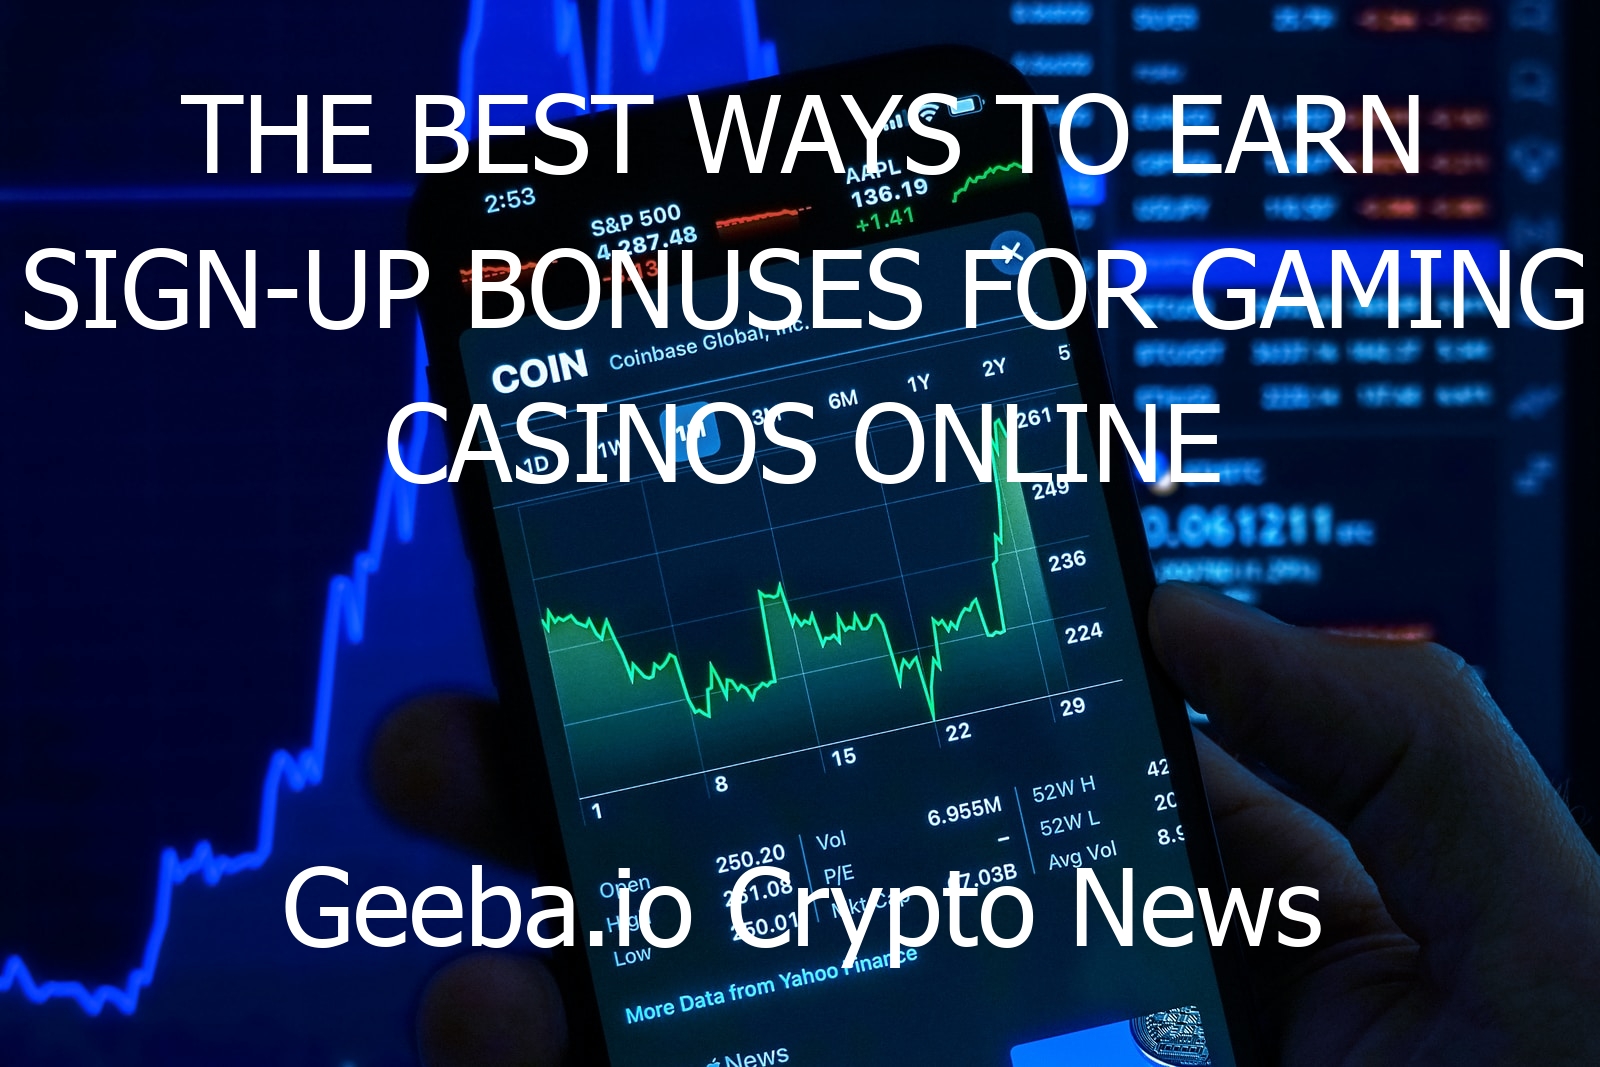 the best ways to earn sign up bonuses for gaming casinos online 9468